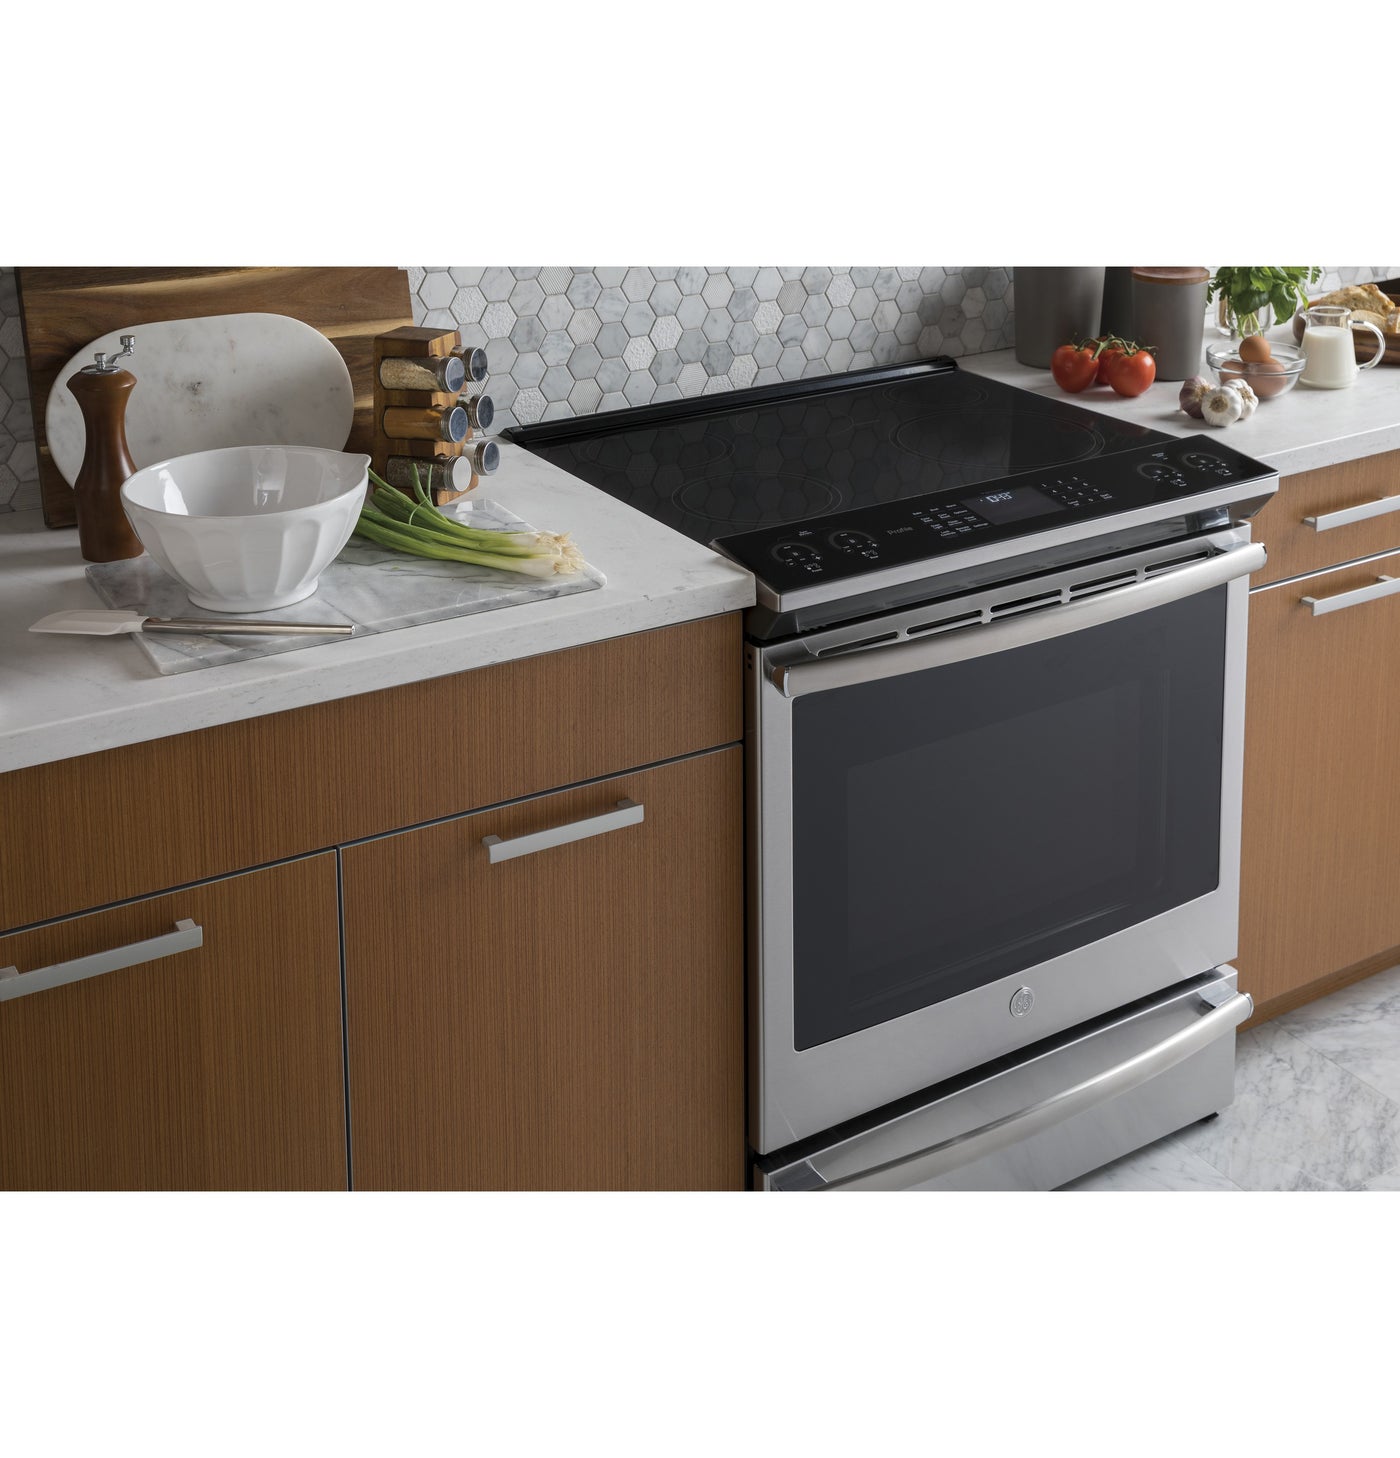 GE Profile Stainless Steel 30" Slide-In Induction Range (5.3 Cu. Ft.) - PCHS920YMFS